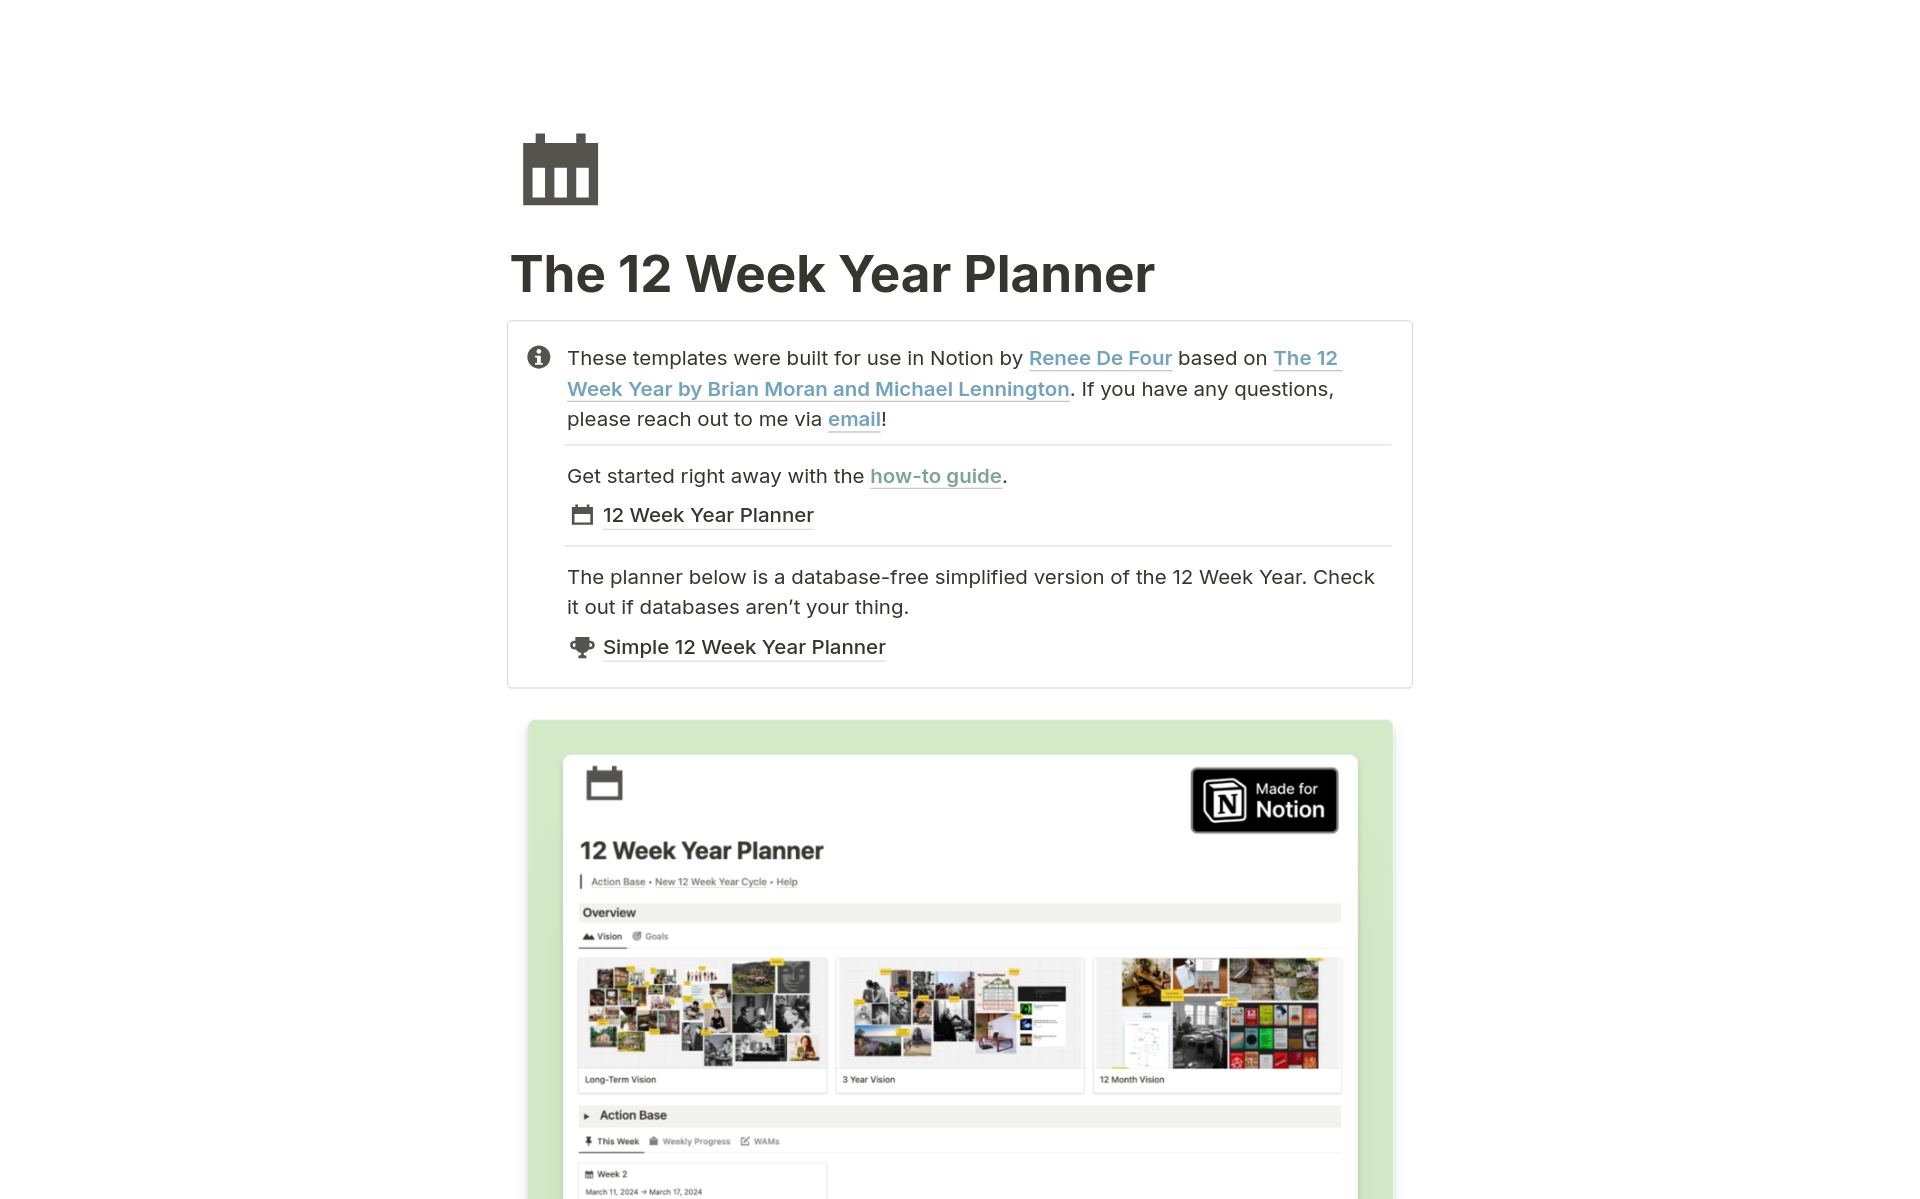 Inspired by 'The 12 Week Year,' this Notion template provides a fresh approach to goal achievement. Instead of year-long plans, it guides you to break down annual objectives into focused 3-month increments and prioritize high-impact actions.